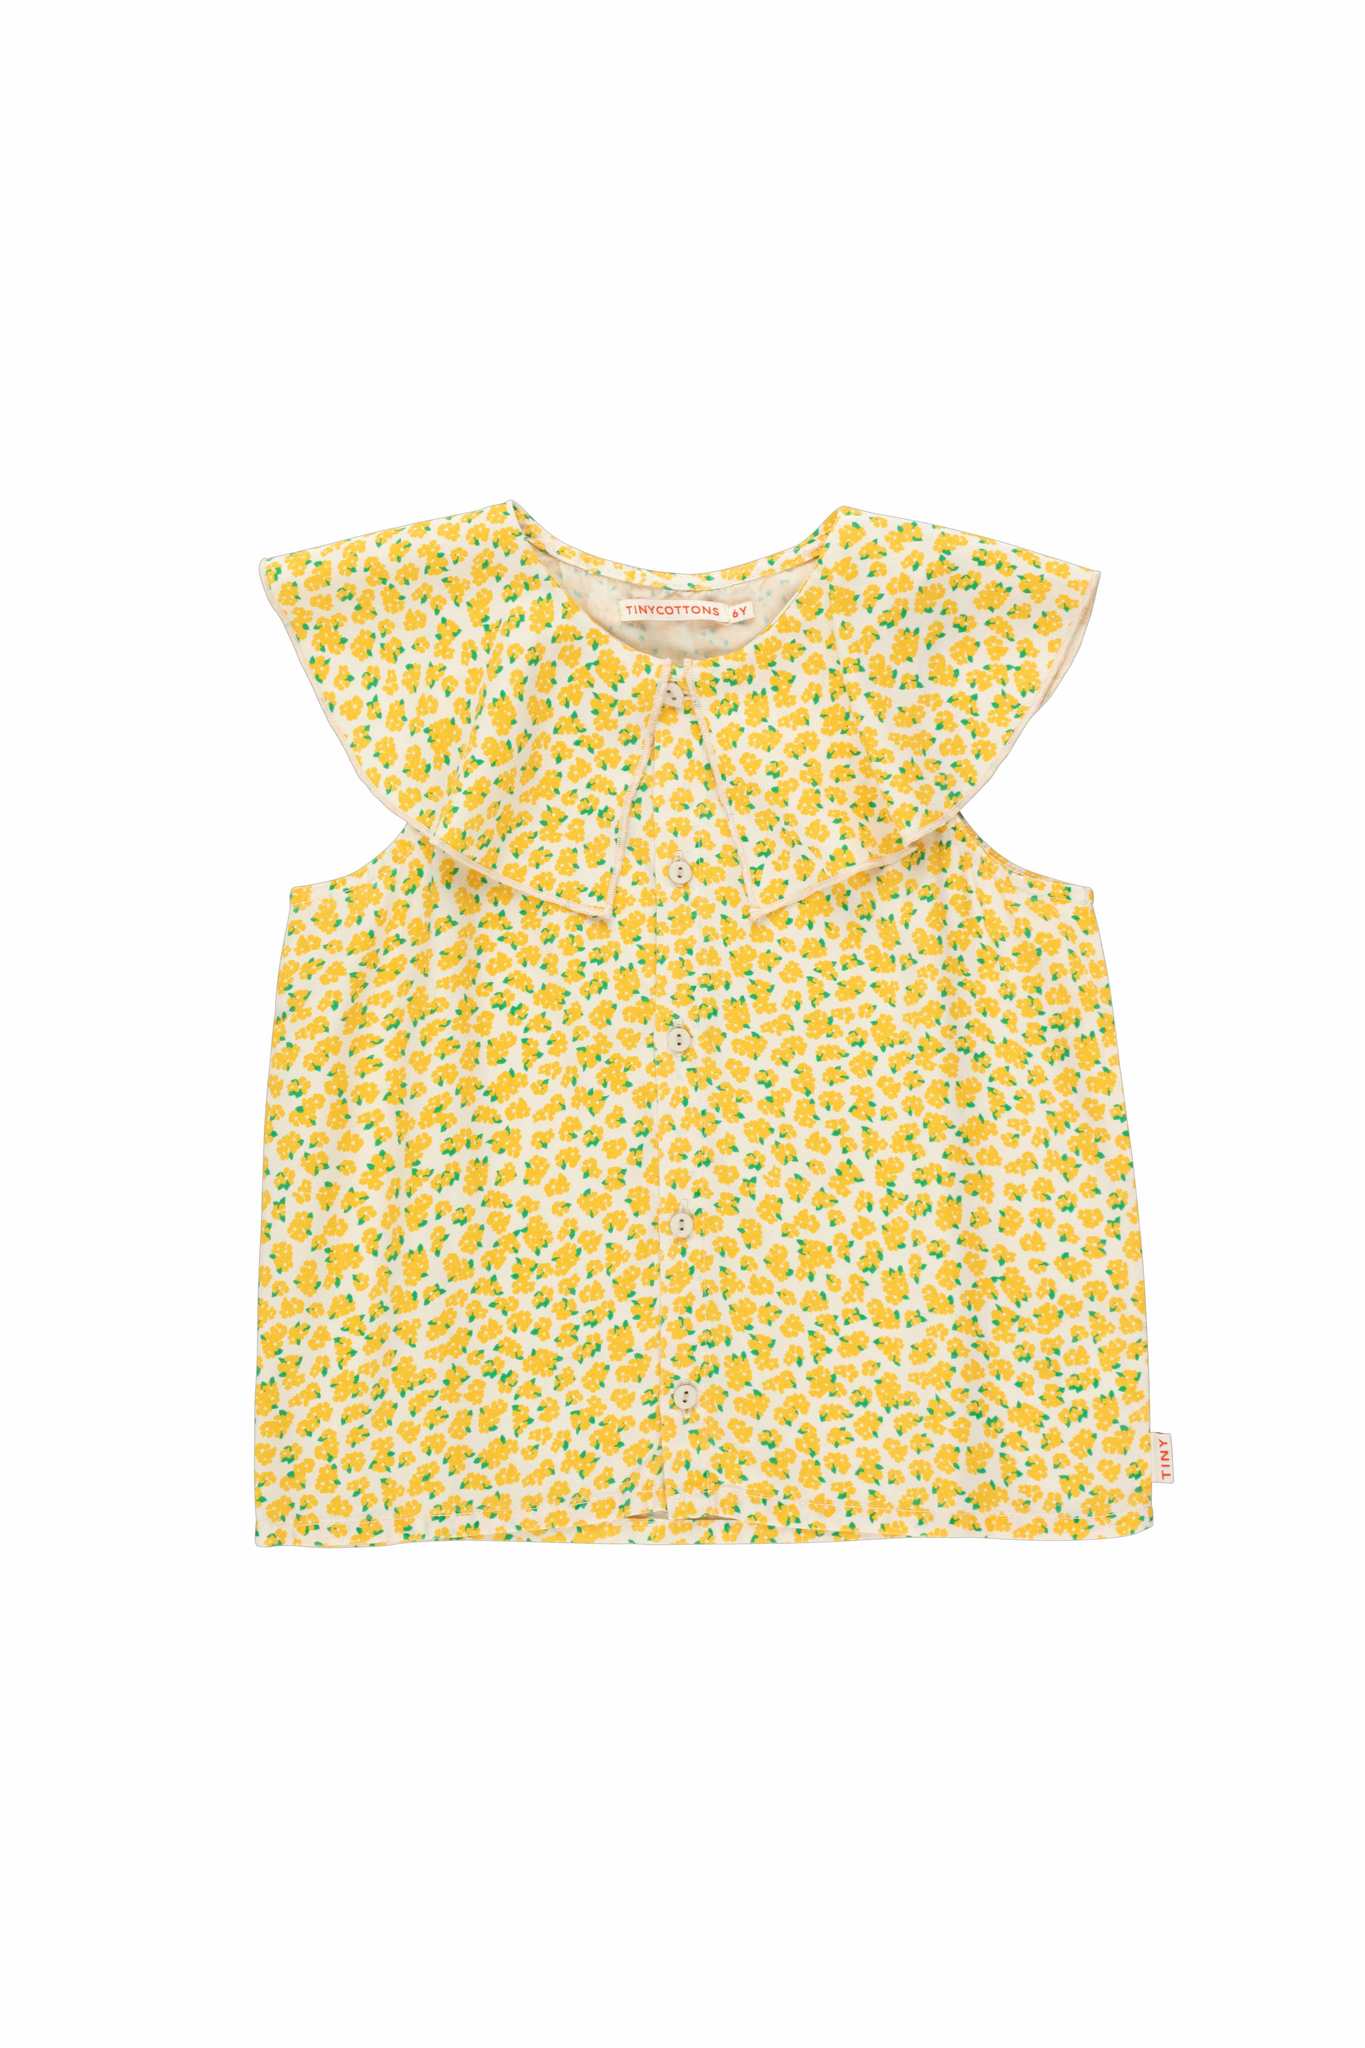 Tinycottons - Yellow Floral Blouse